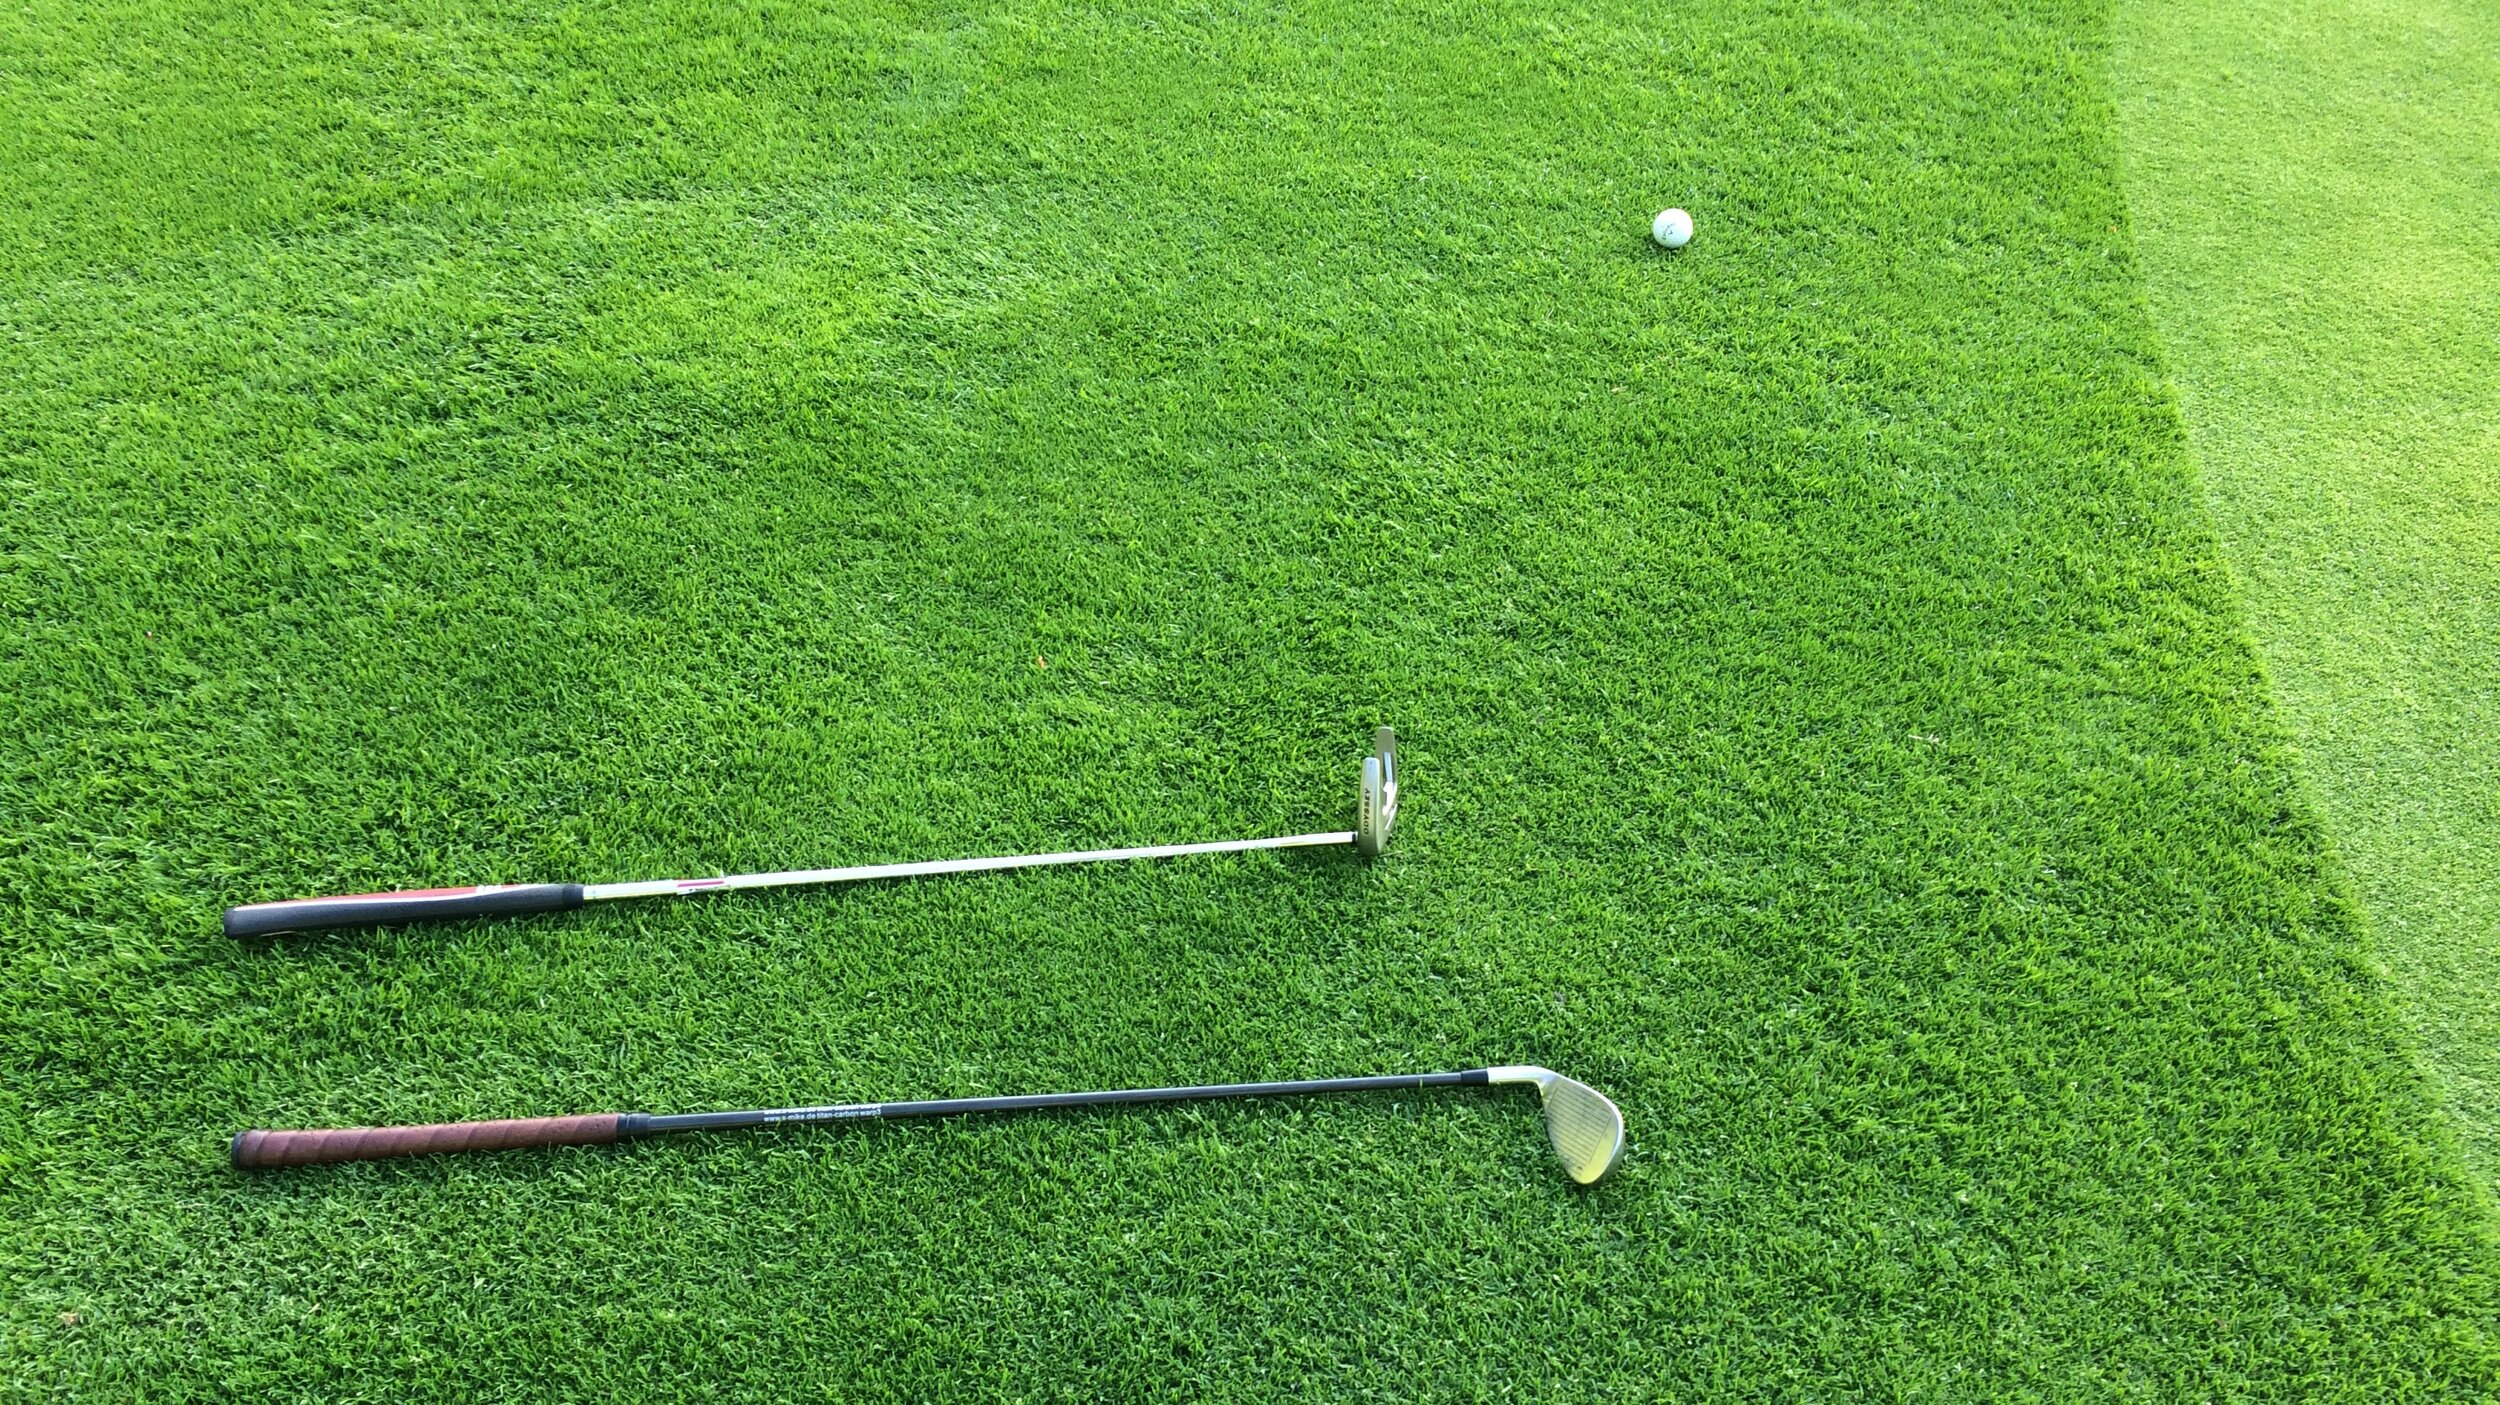 two golf clubs on grass with golf ball